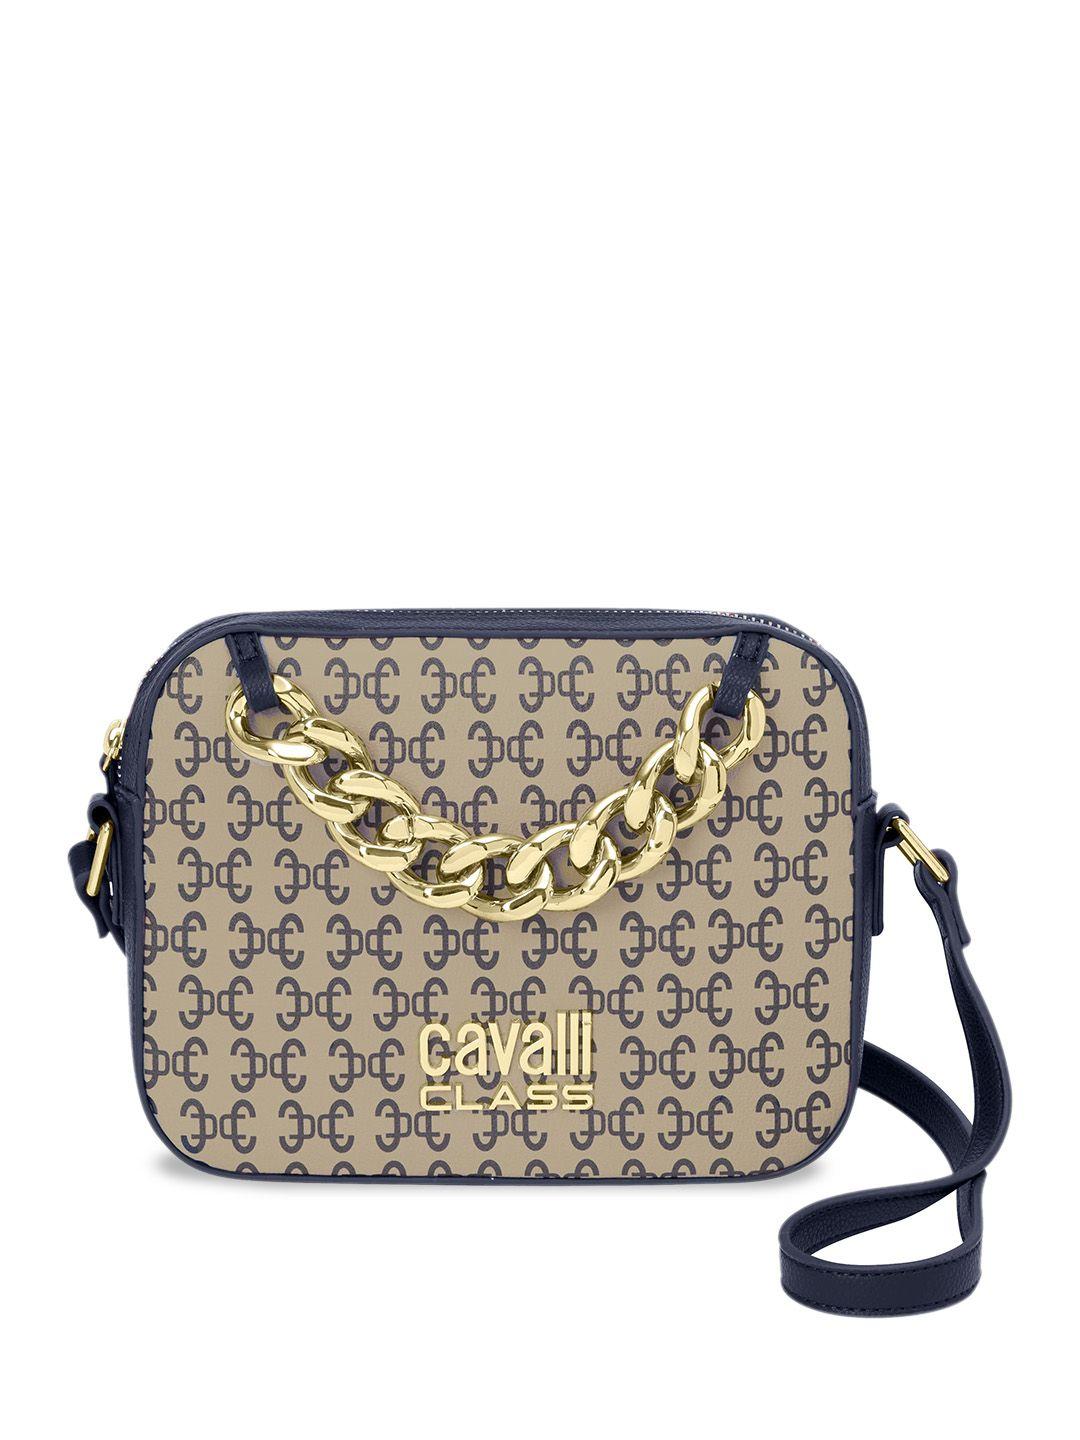 cavalli class typography printed structured sling bag